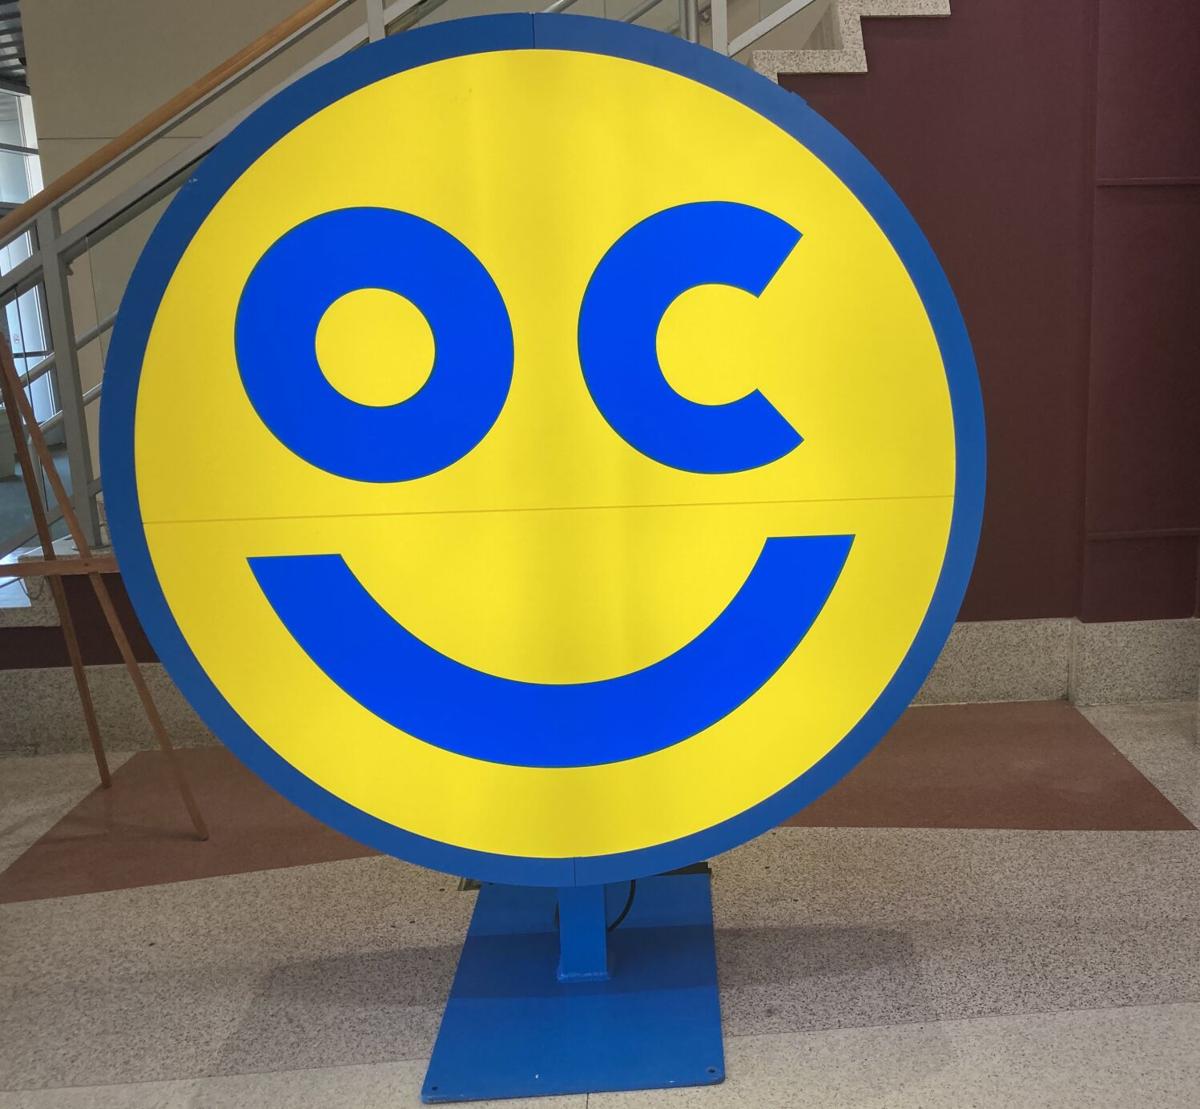 Ocean City smiley face more than just a logo to resort officials ...